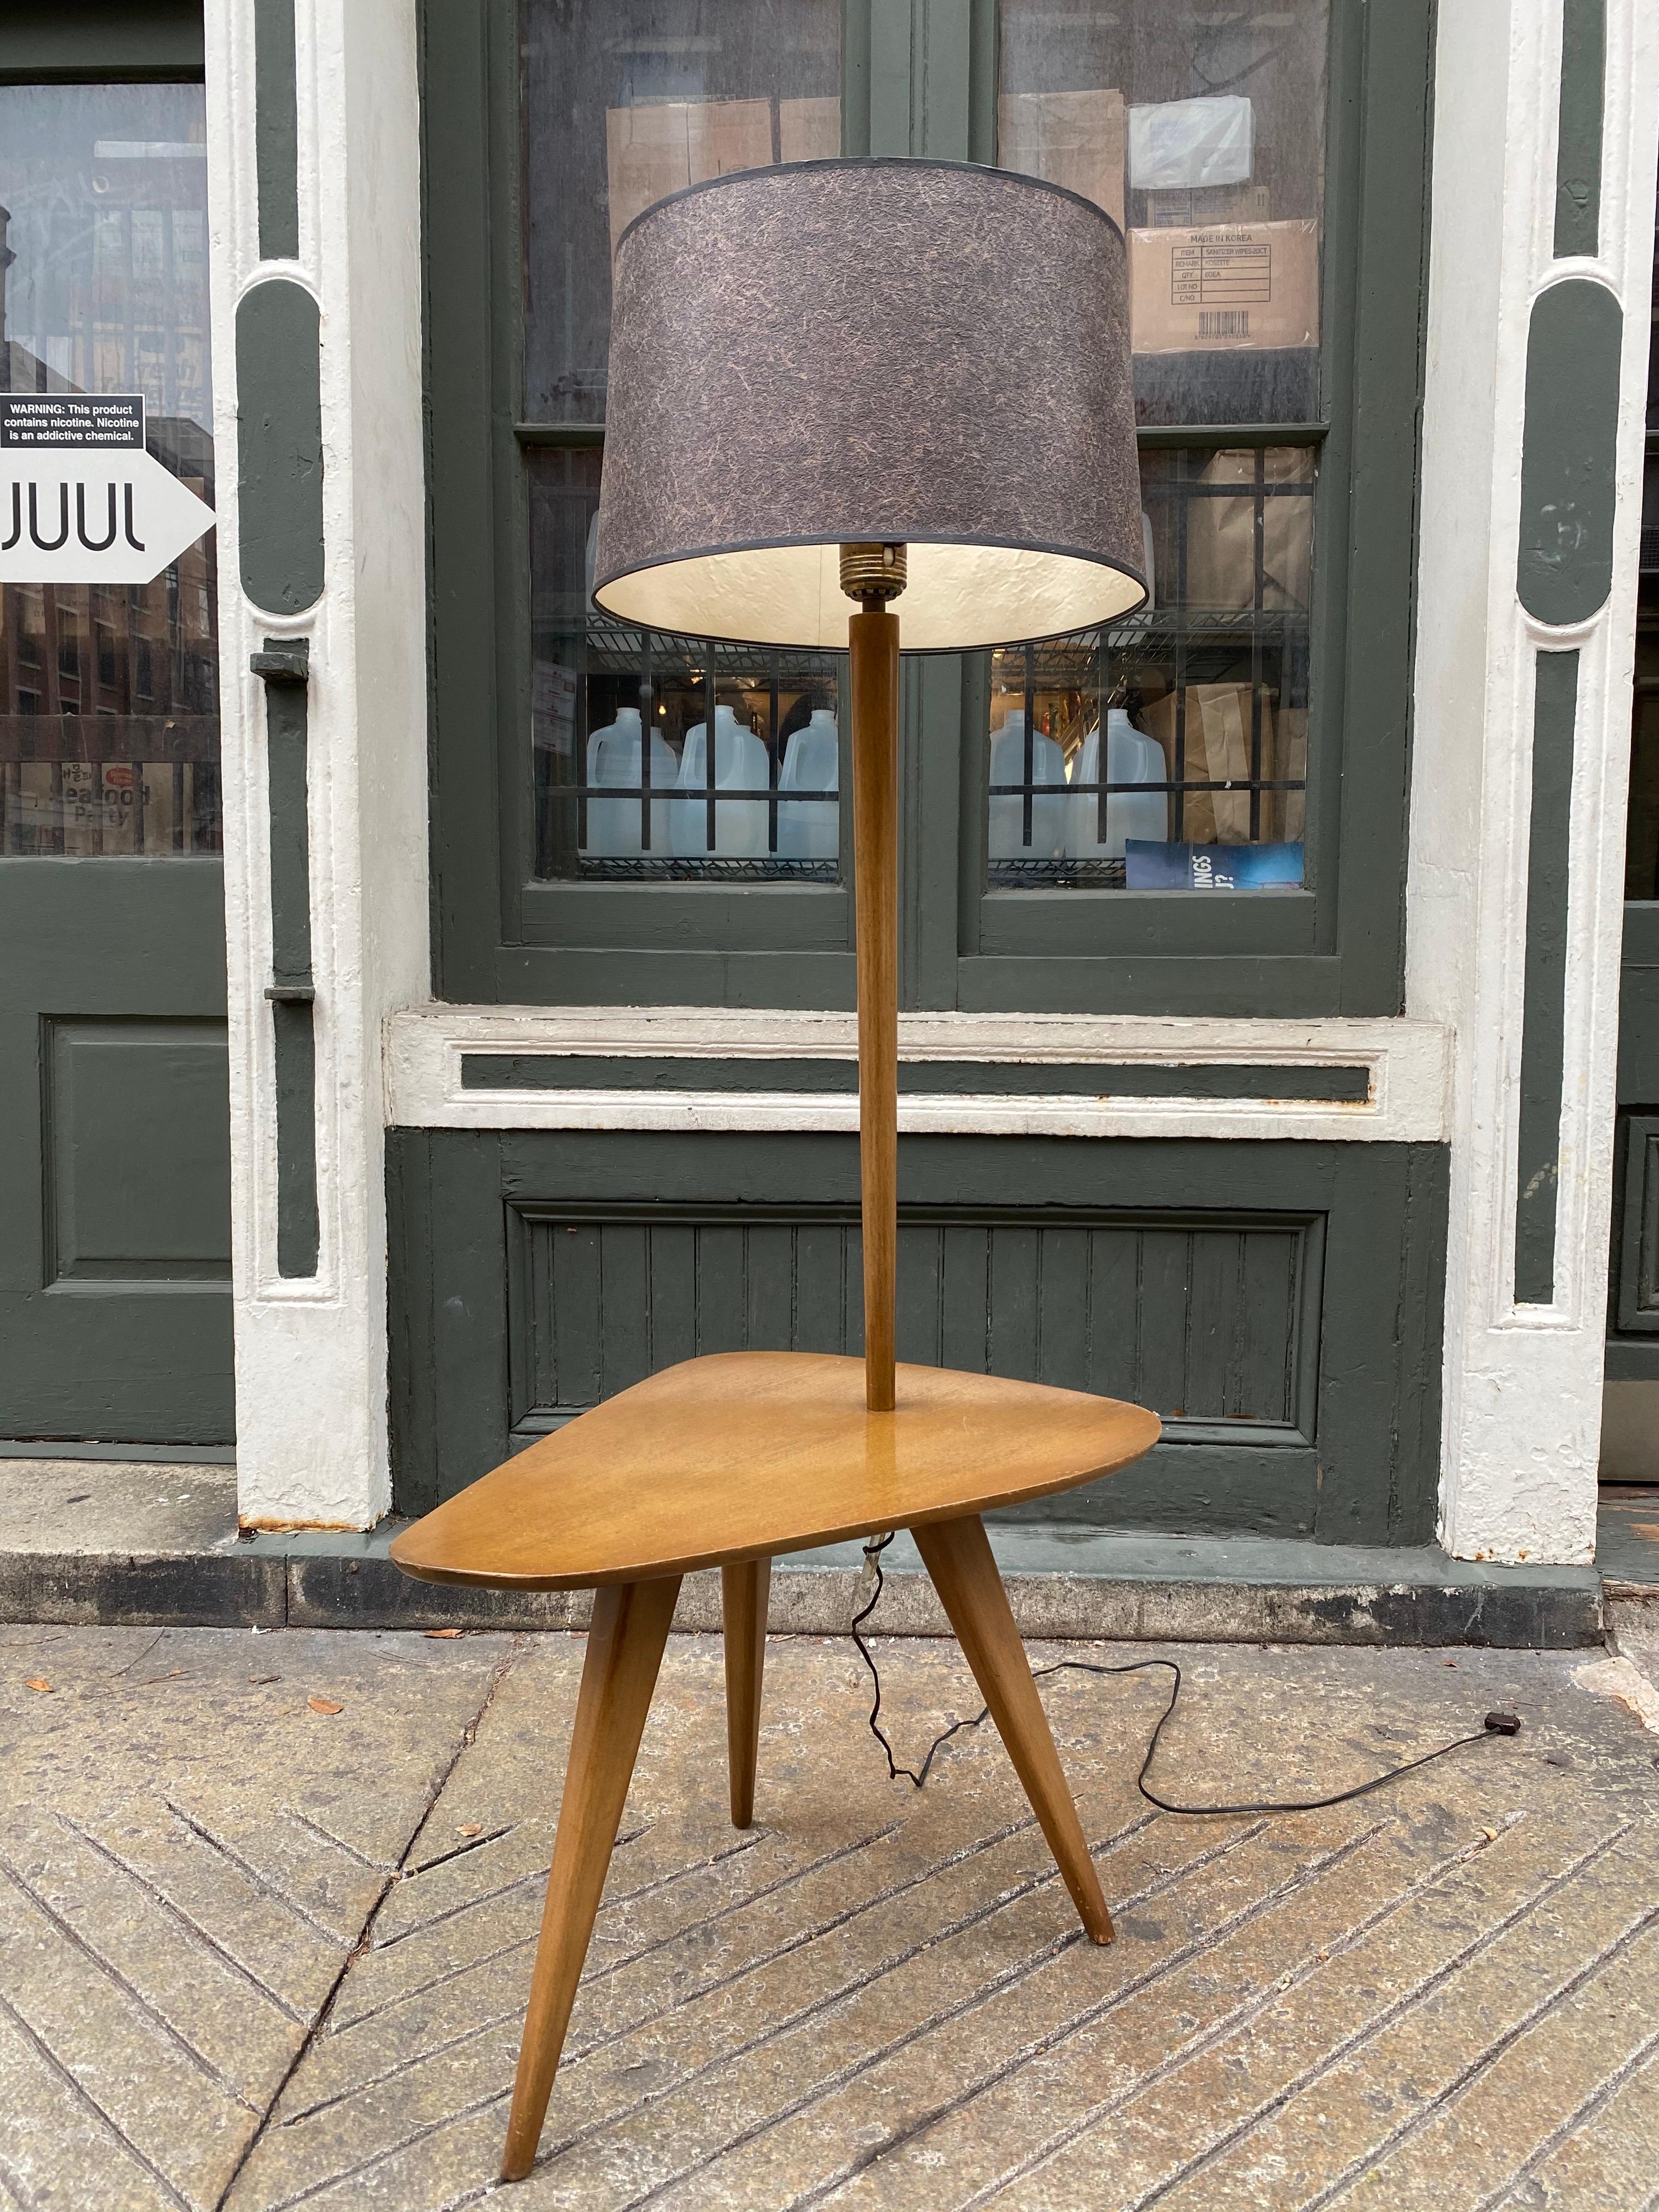 Vladimir Kagan lamp table designed by Kagan/Dreyfuss for a NYC upper east side apartment in 1954. Stamped on underside. Rear leg is slotted for electrical cord to run down leg without being seen. Original finish presents very well.